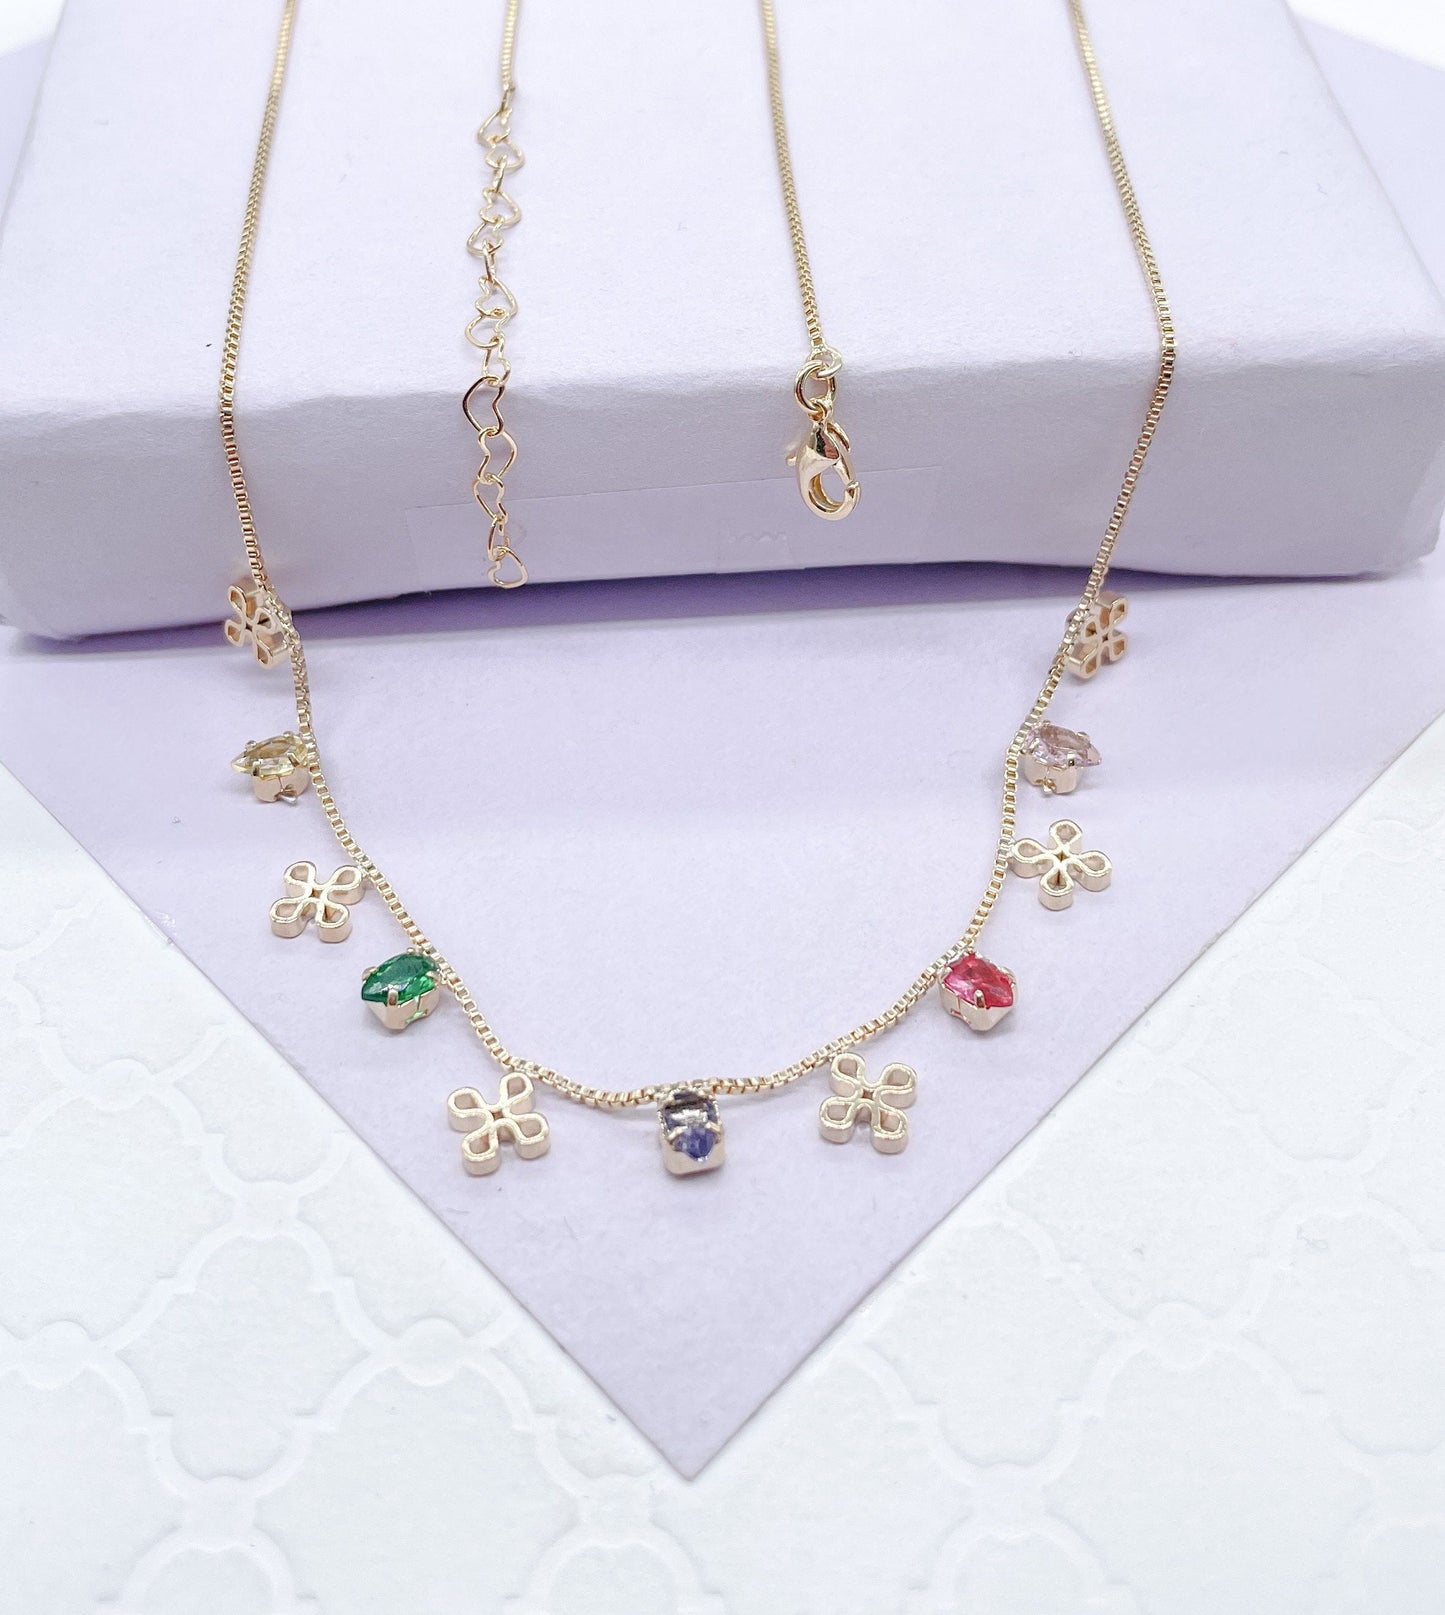 18k Gold Filled Dainty Box Chain Choker With Colorful CZ and Flower Charms